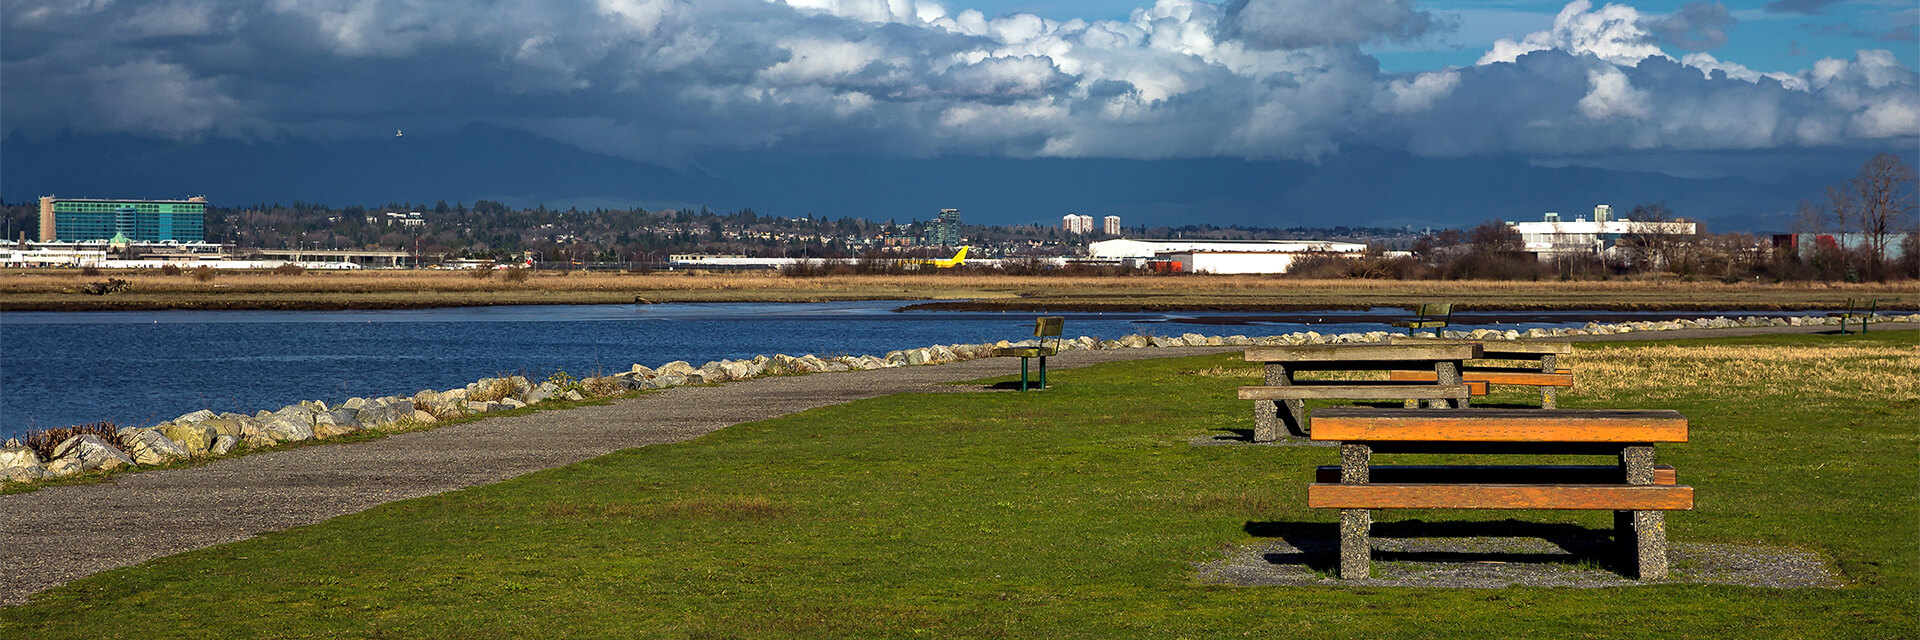 Richmond riverside picnic areas across from airport